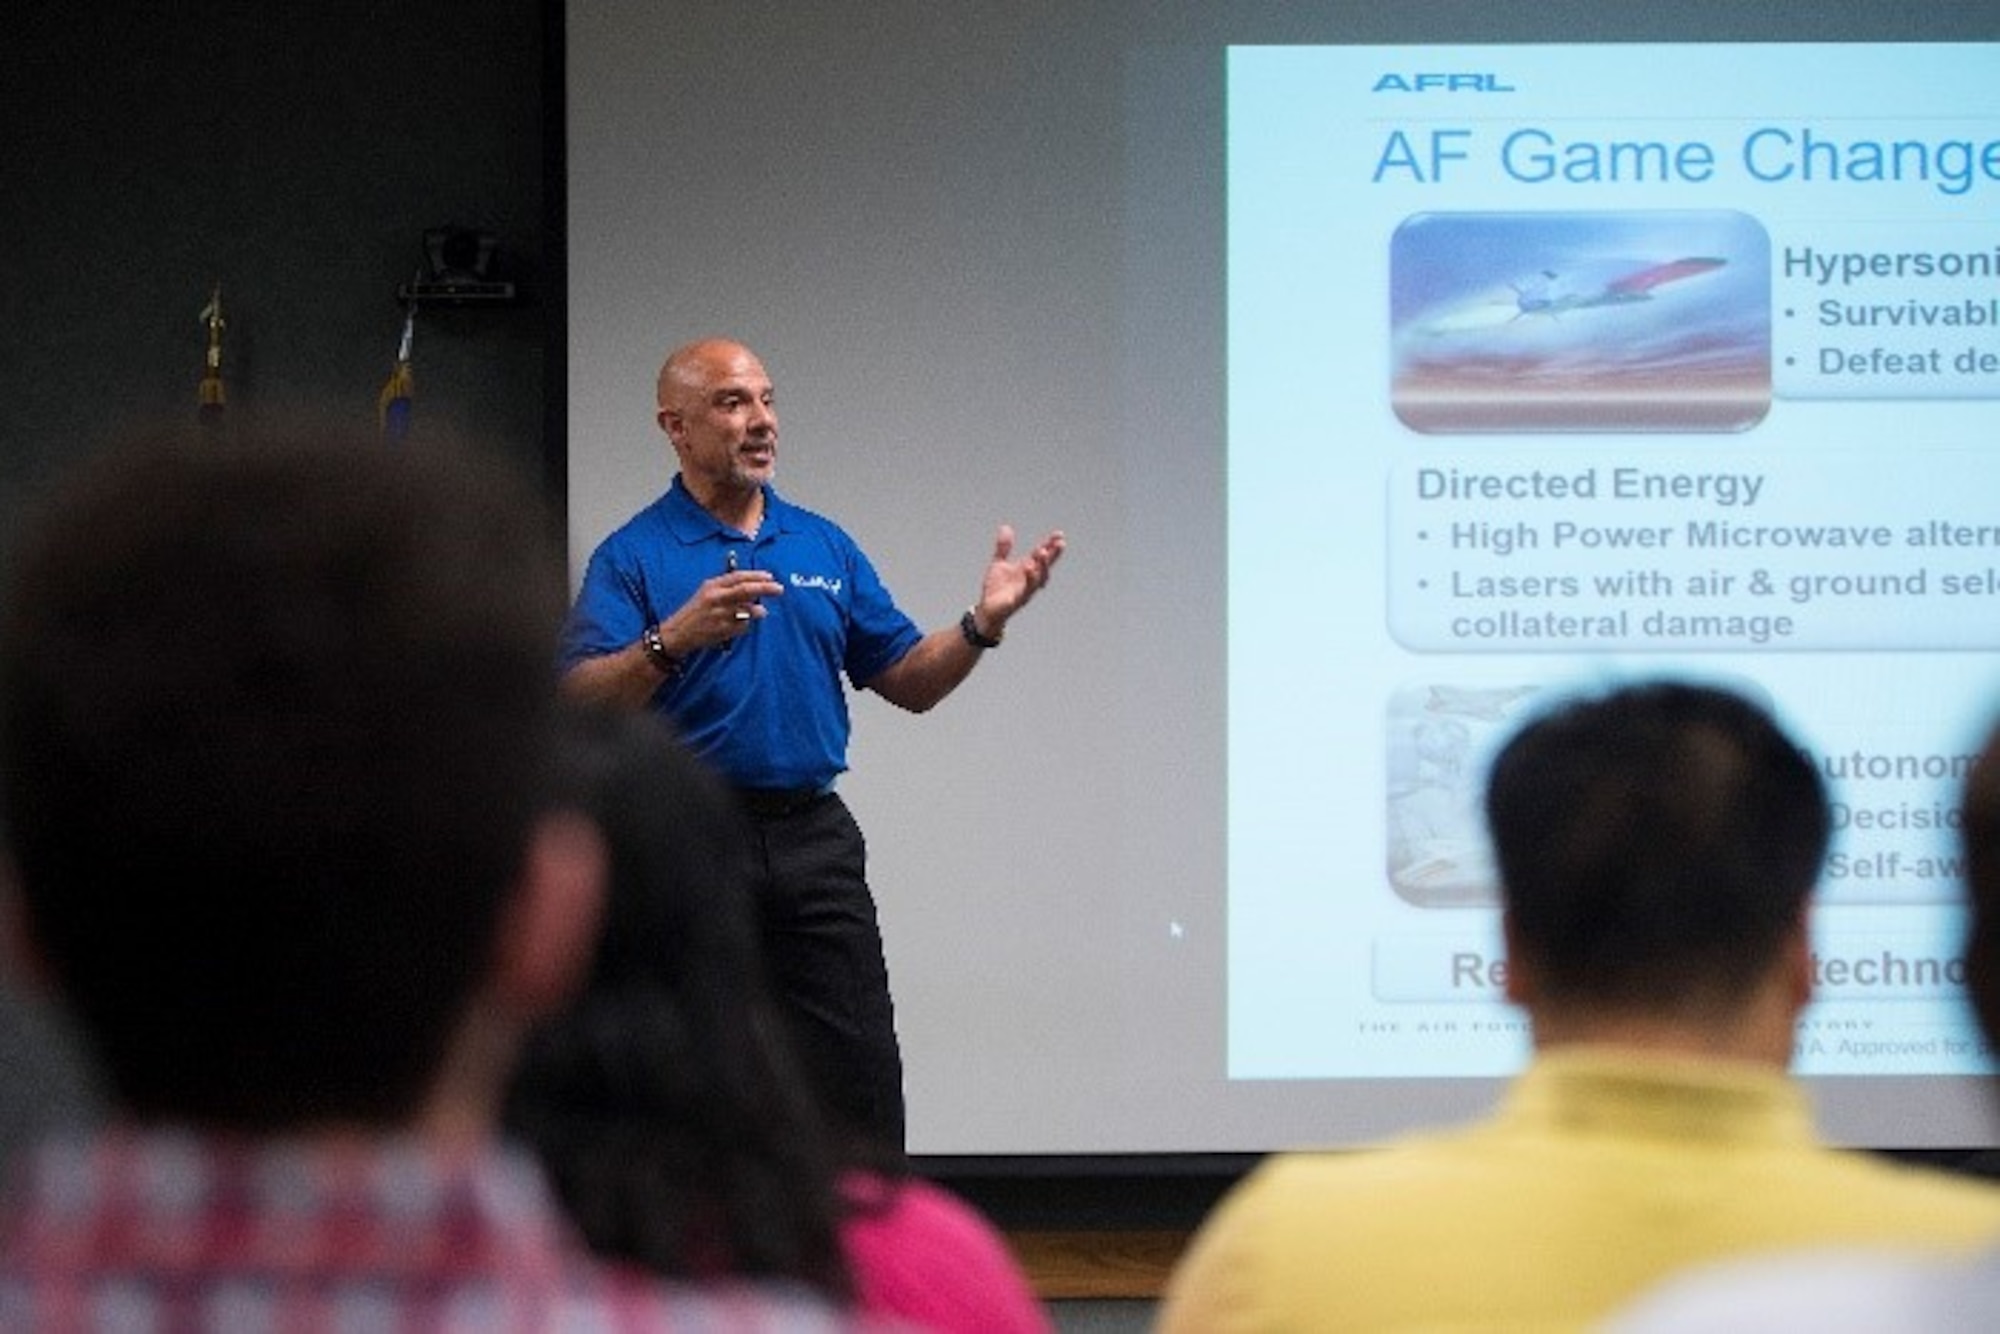 Miguel Maldonado, Air Force Research Laboratory Aerospace Systems Directorate Turbine Engines Division, gives students from area universities an overview of AFRL April 18, 2019, at the start of the Wright-Patterson Air Force Base Onsite Career Day. The event, sponsored by the Hispanic and Black Employment Programs, was held to motivate qualified student candidates to consider a career with Wright-Patt in the science, technology, engineering and math fields.